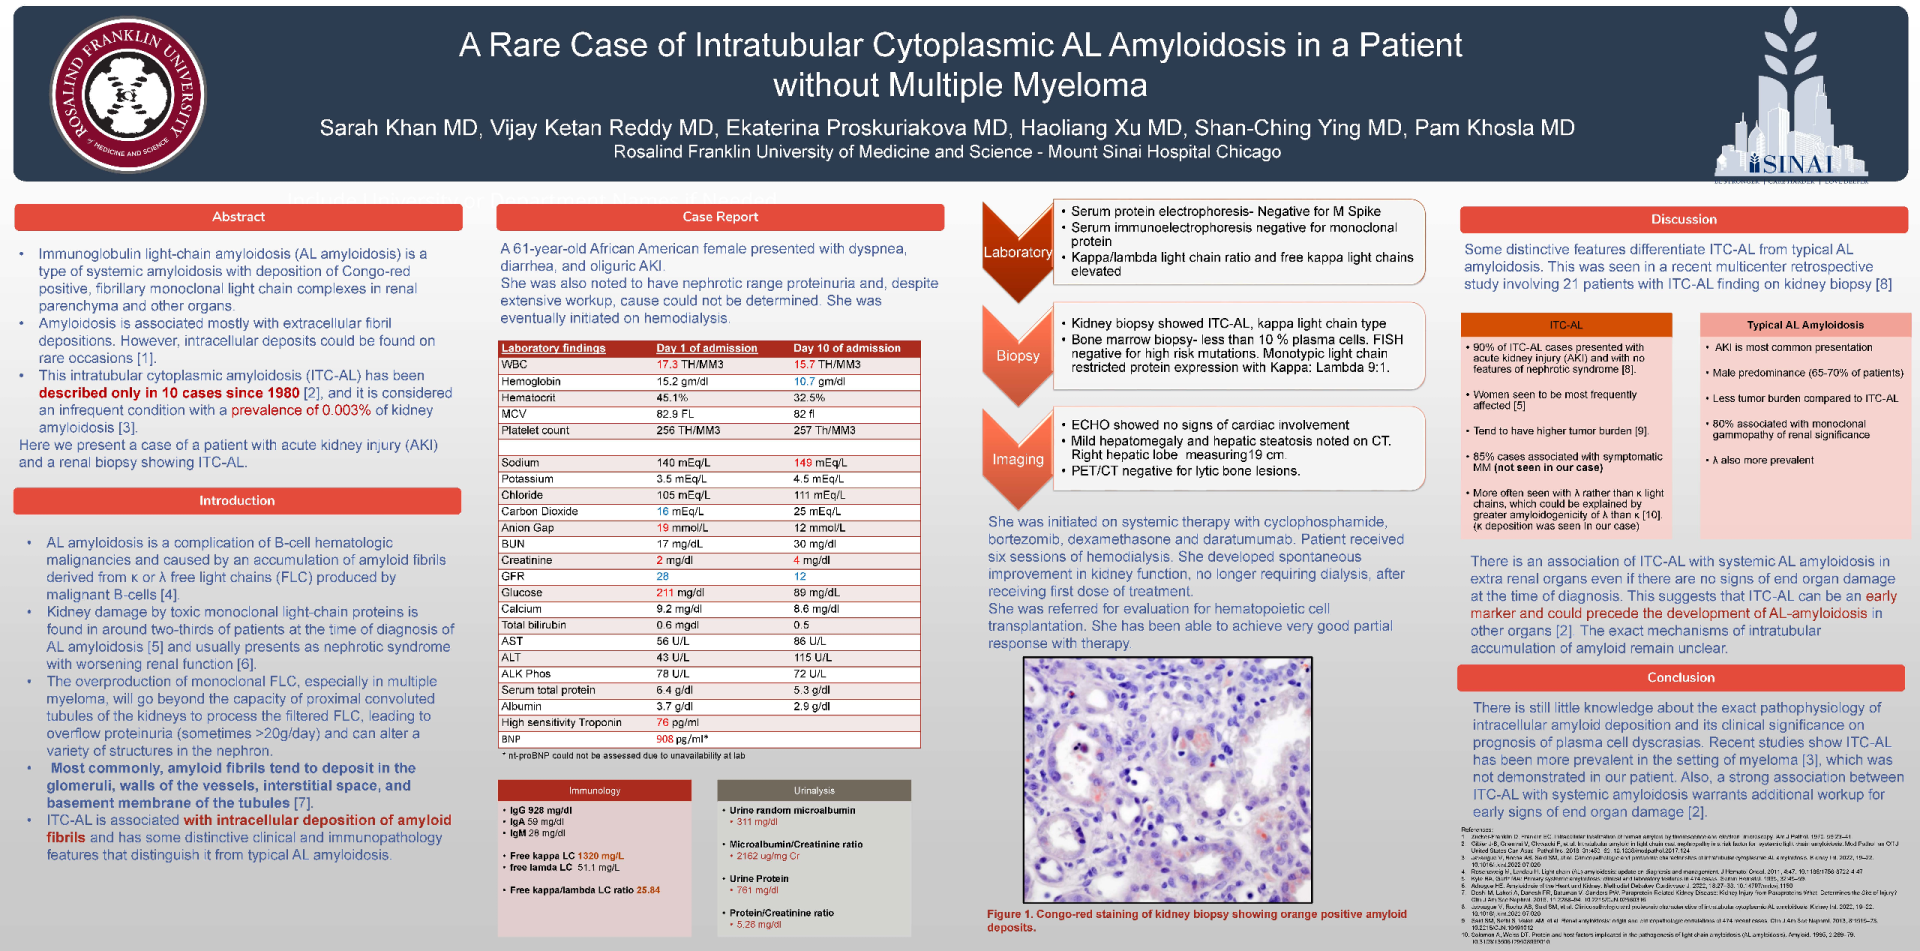 A Rare Case of Intratubular Cytoplasmic AL Amyloidosis in a Patient Without Multiple Myeloma icon